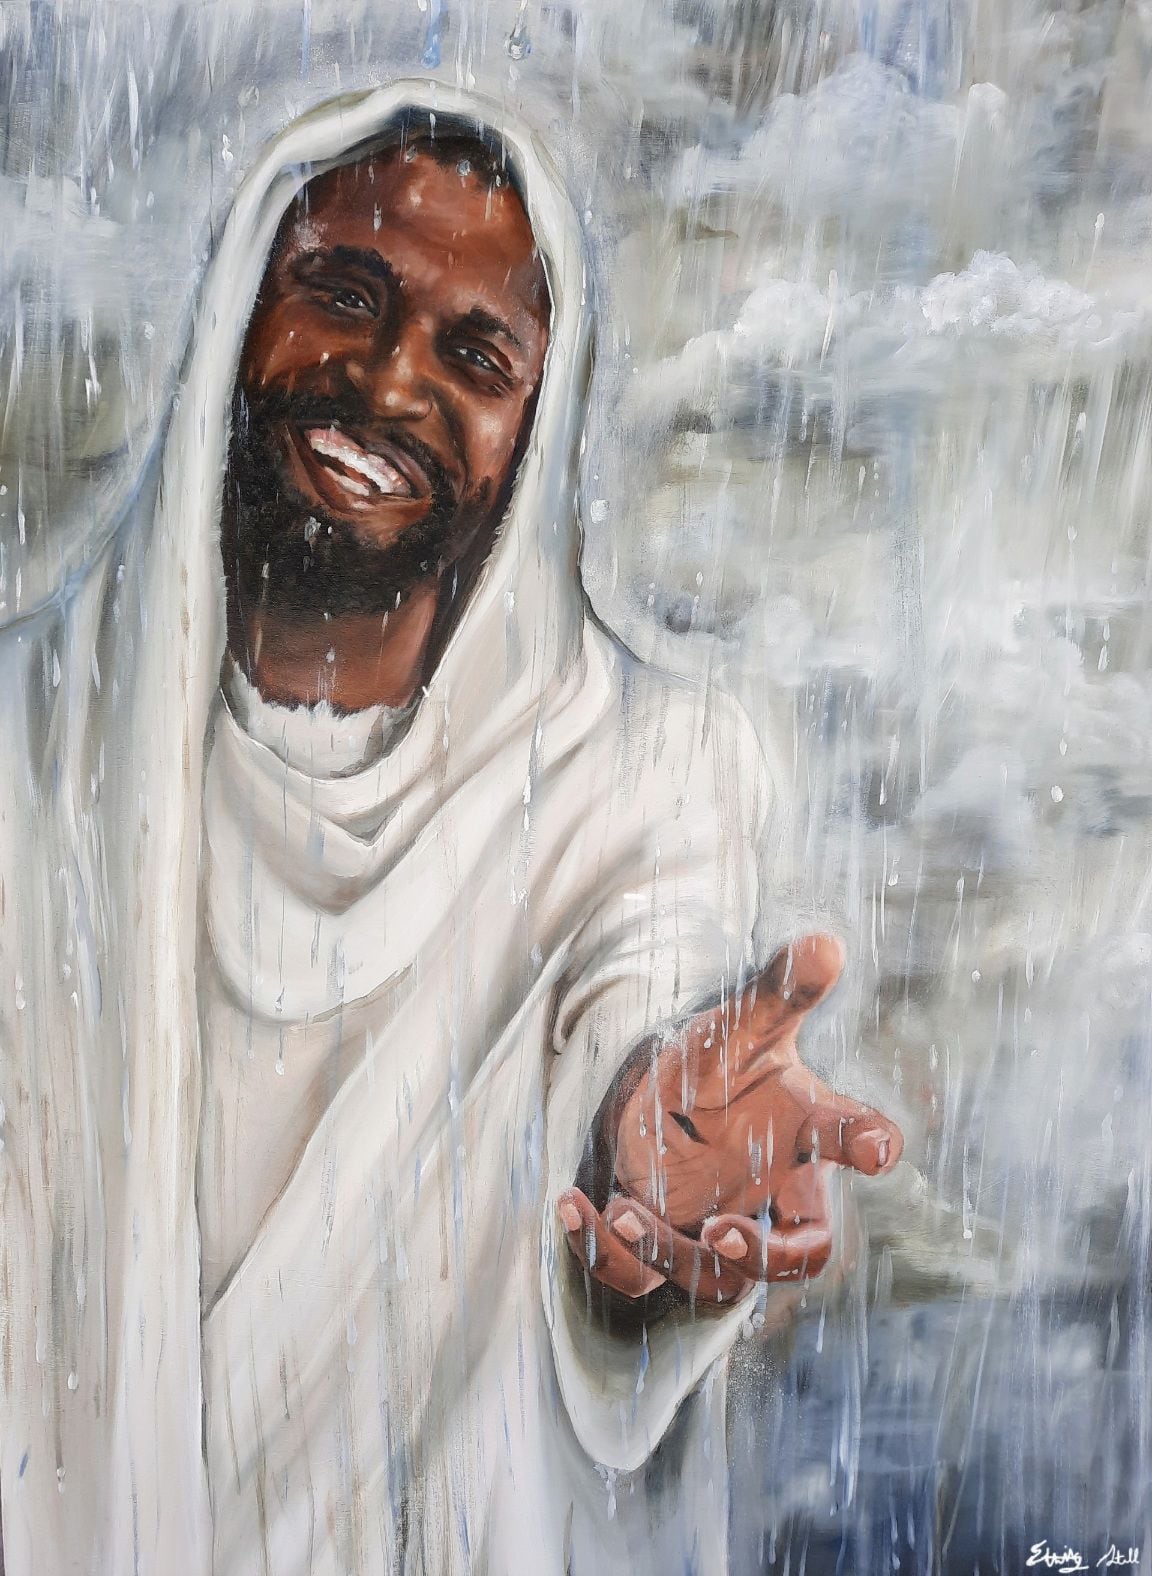 (Eternity Stovall) "Joy in the Storms" is one of many depictions of Jesus on display recently at Provo's Writ & Vision.